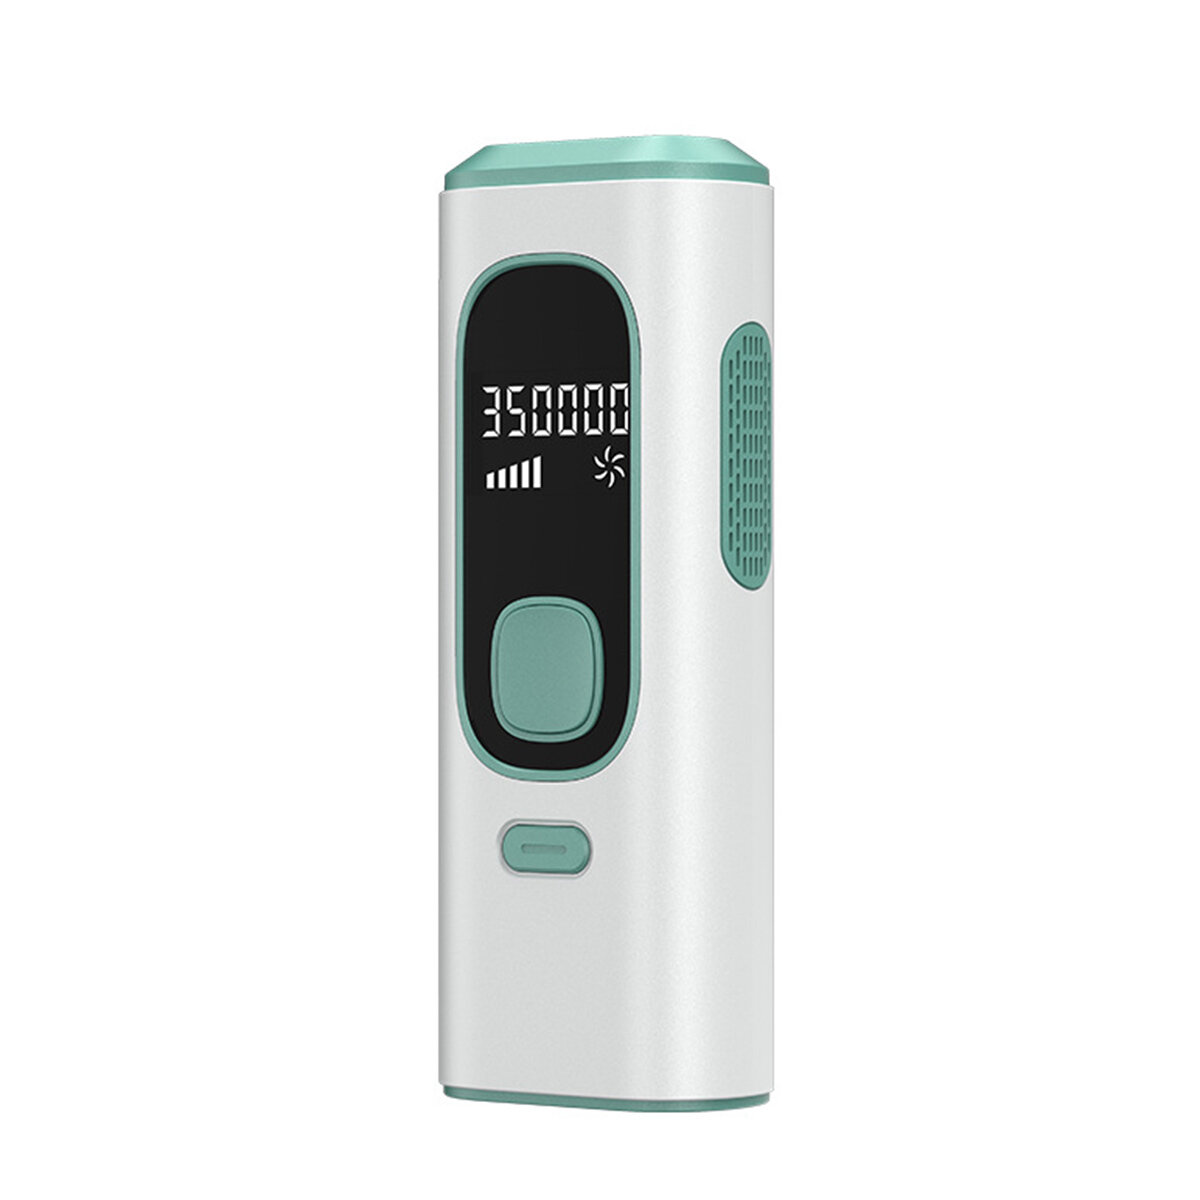 Image of 999999 IPL Laser Painless Permanent Hair Removal Device Portable Face Body Hair Epilator